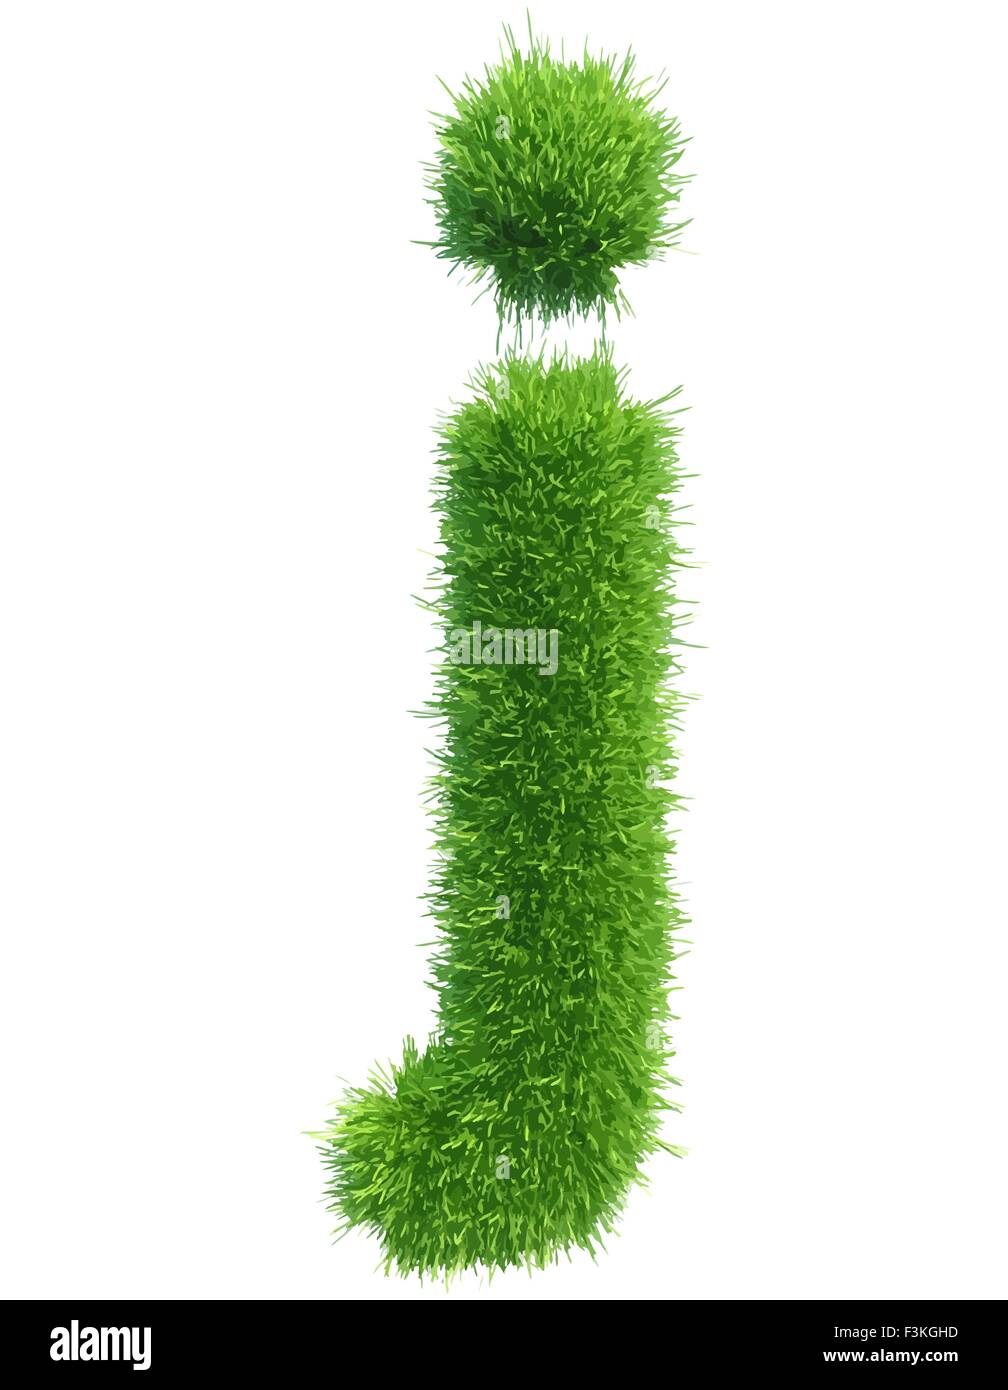 Vector small grass letter j on white background Stock Vector Image ...